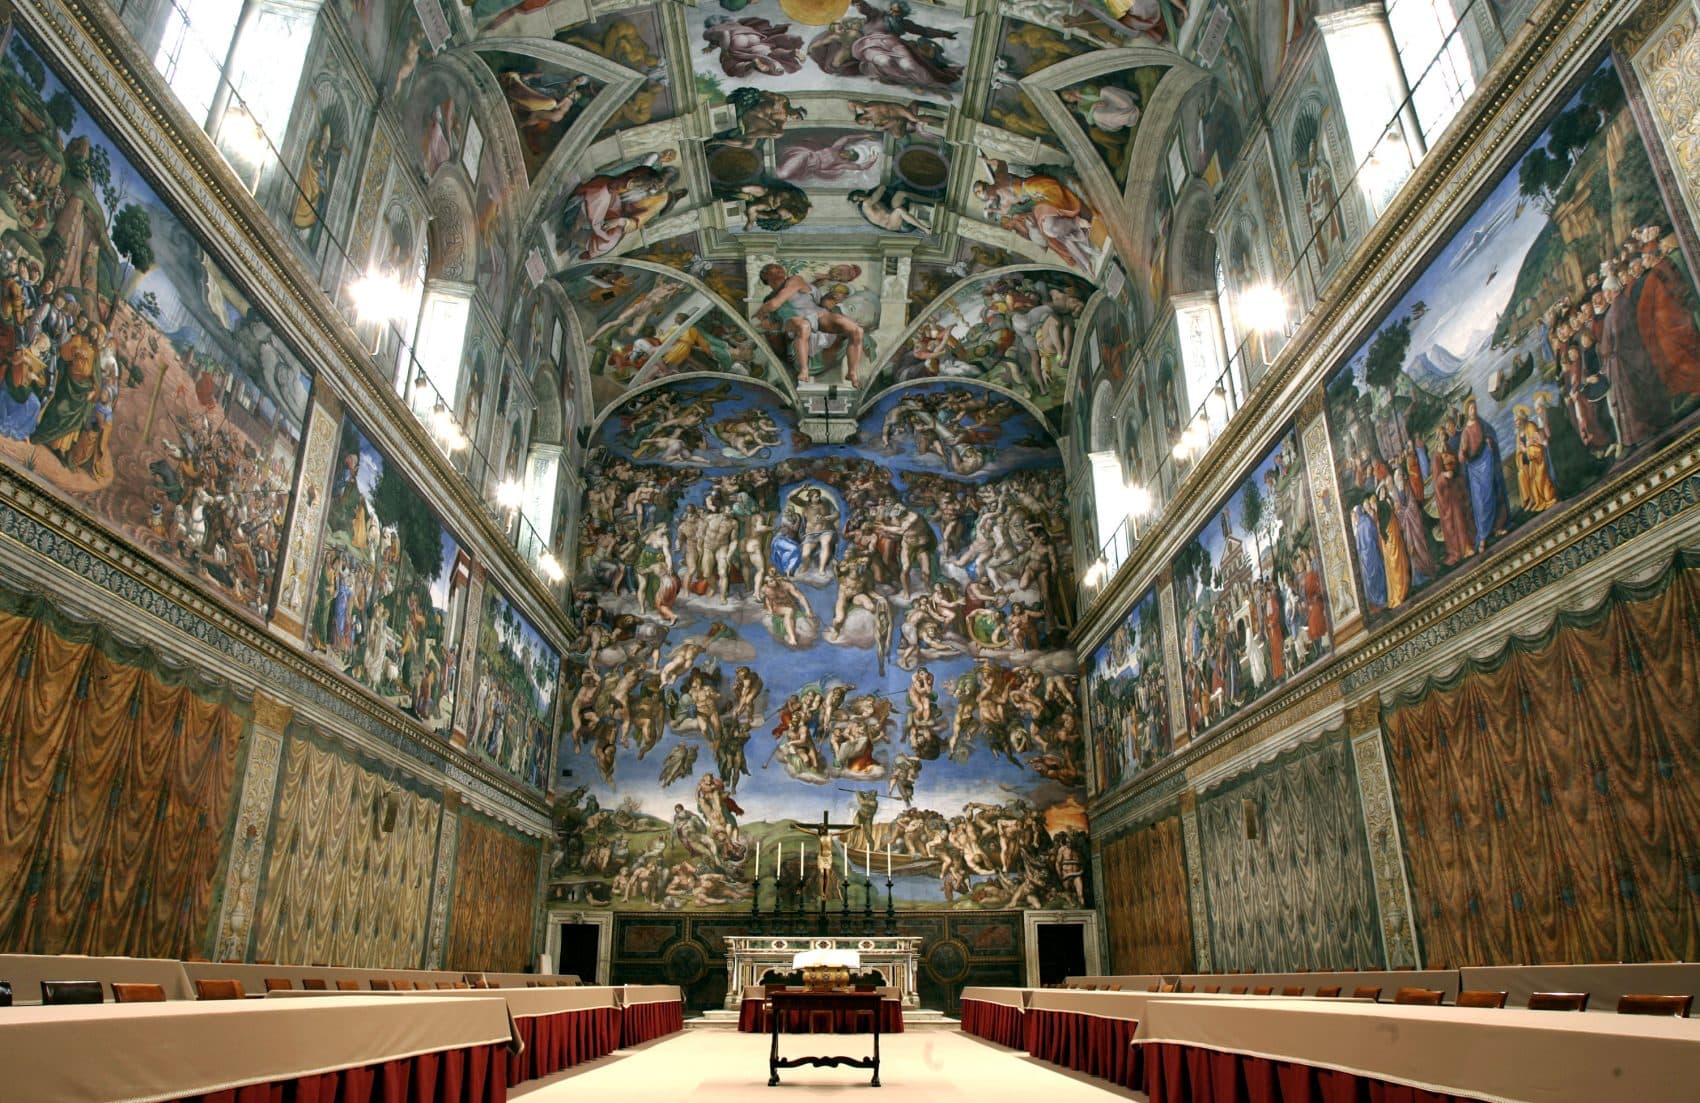 In this April 16, 2005 file photo, tables and chairs line the Sistine Chapel at the Vatican in preparation for the conclave. Five centuries after Michelangelo's ceiling frescoes were inaugurated at the Sistine Chapel, at least 10,000 people visit the site each day, raising concerns about temperature, dust and humidity affecting the famed art. But a Vatican Museums official said in the Vatican newspaper Wednesday, Oct. 31, 2012 that there are no plans to try to limit tourists' access. (Pier Paolo Cito/AP Photo)